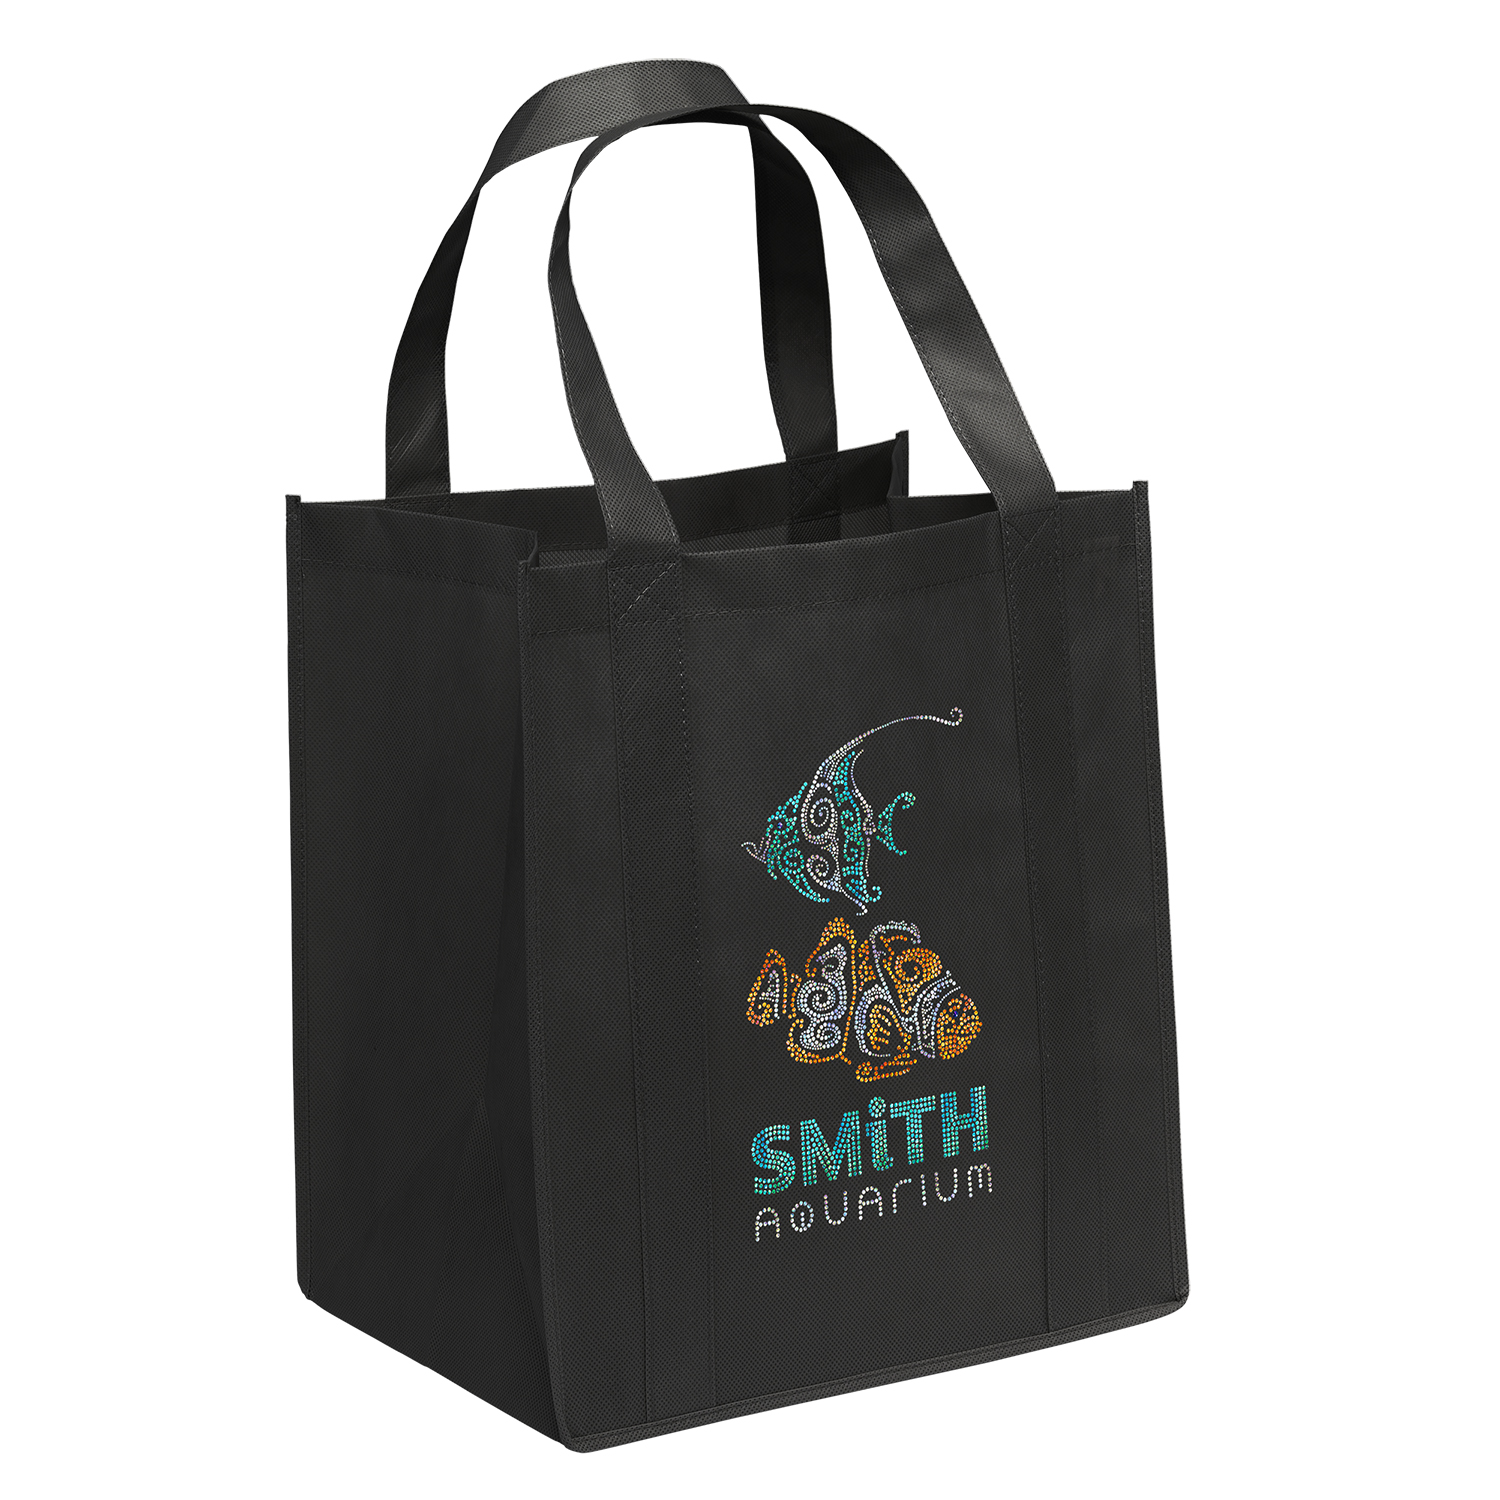 Bag Makers SPB1315 - Custom Printed Eco-Friendly Promotional Non-Woven Big Grocery Tote Bag